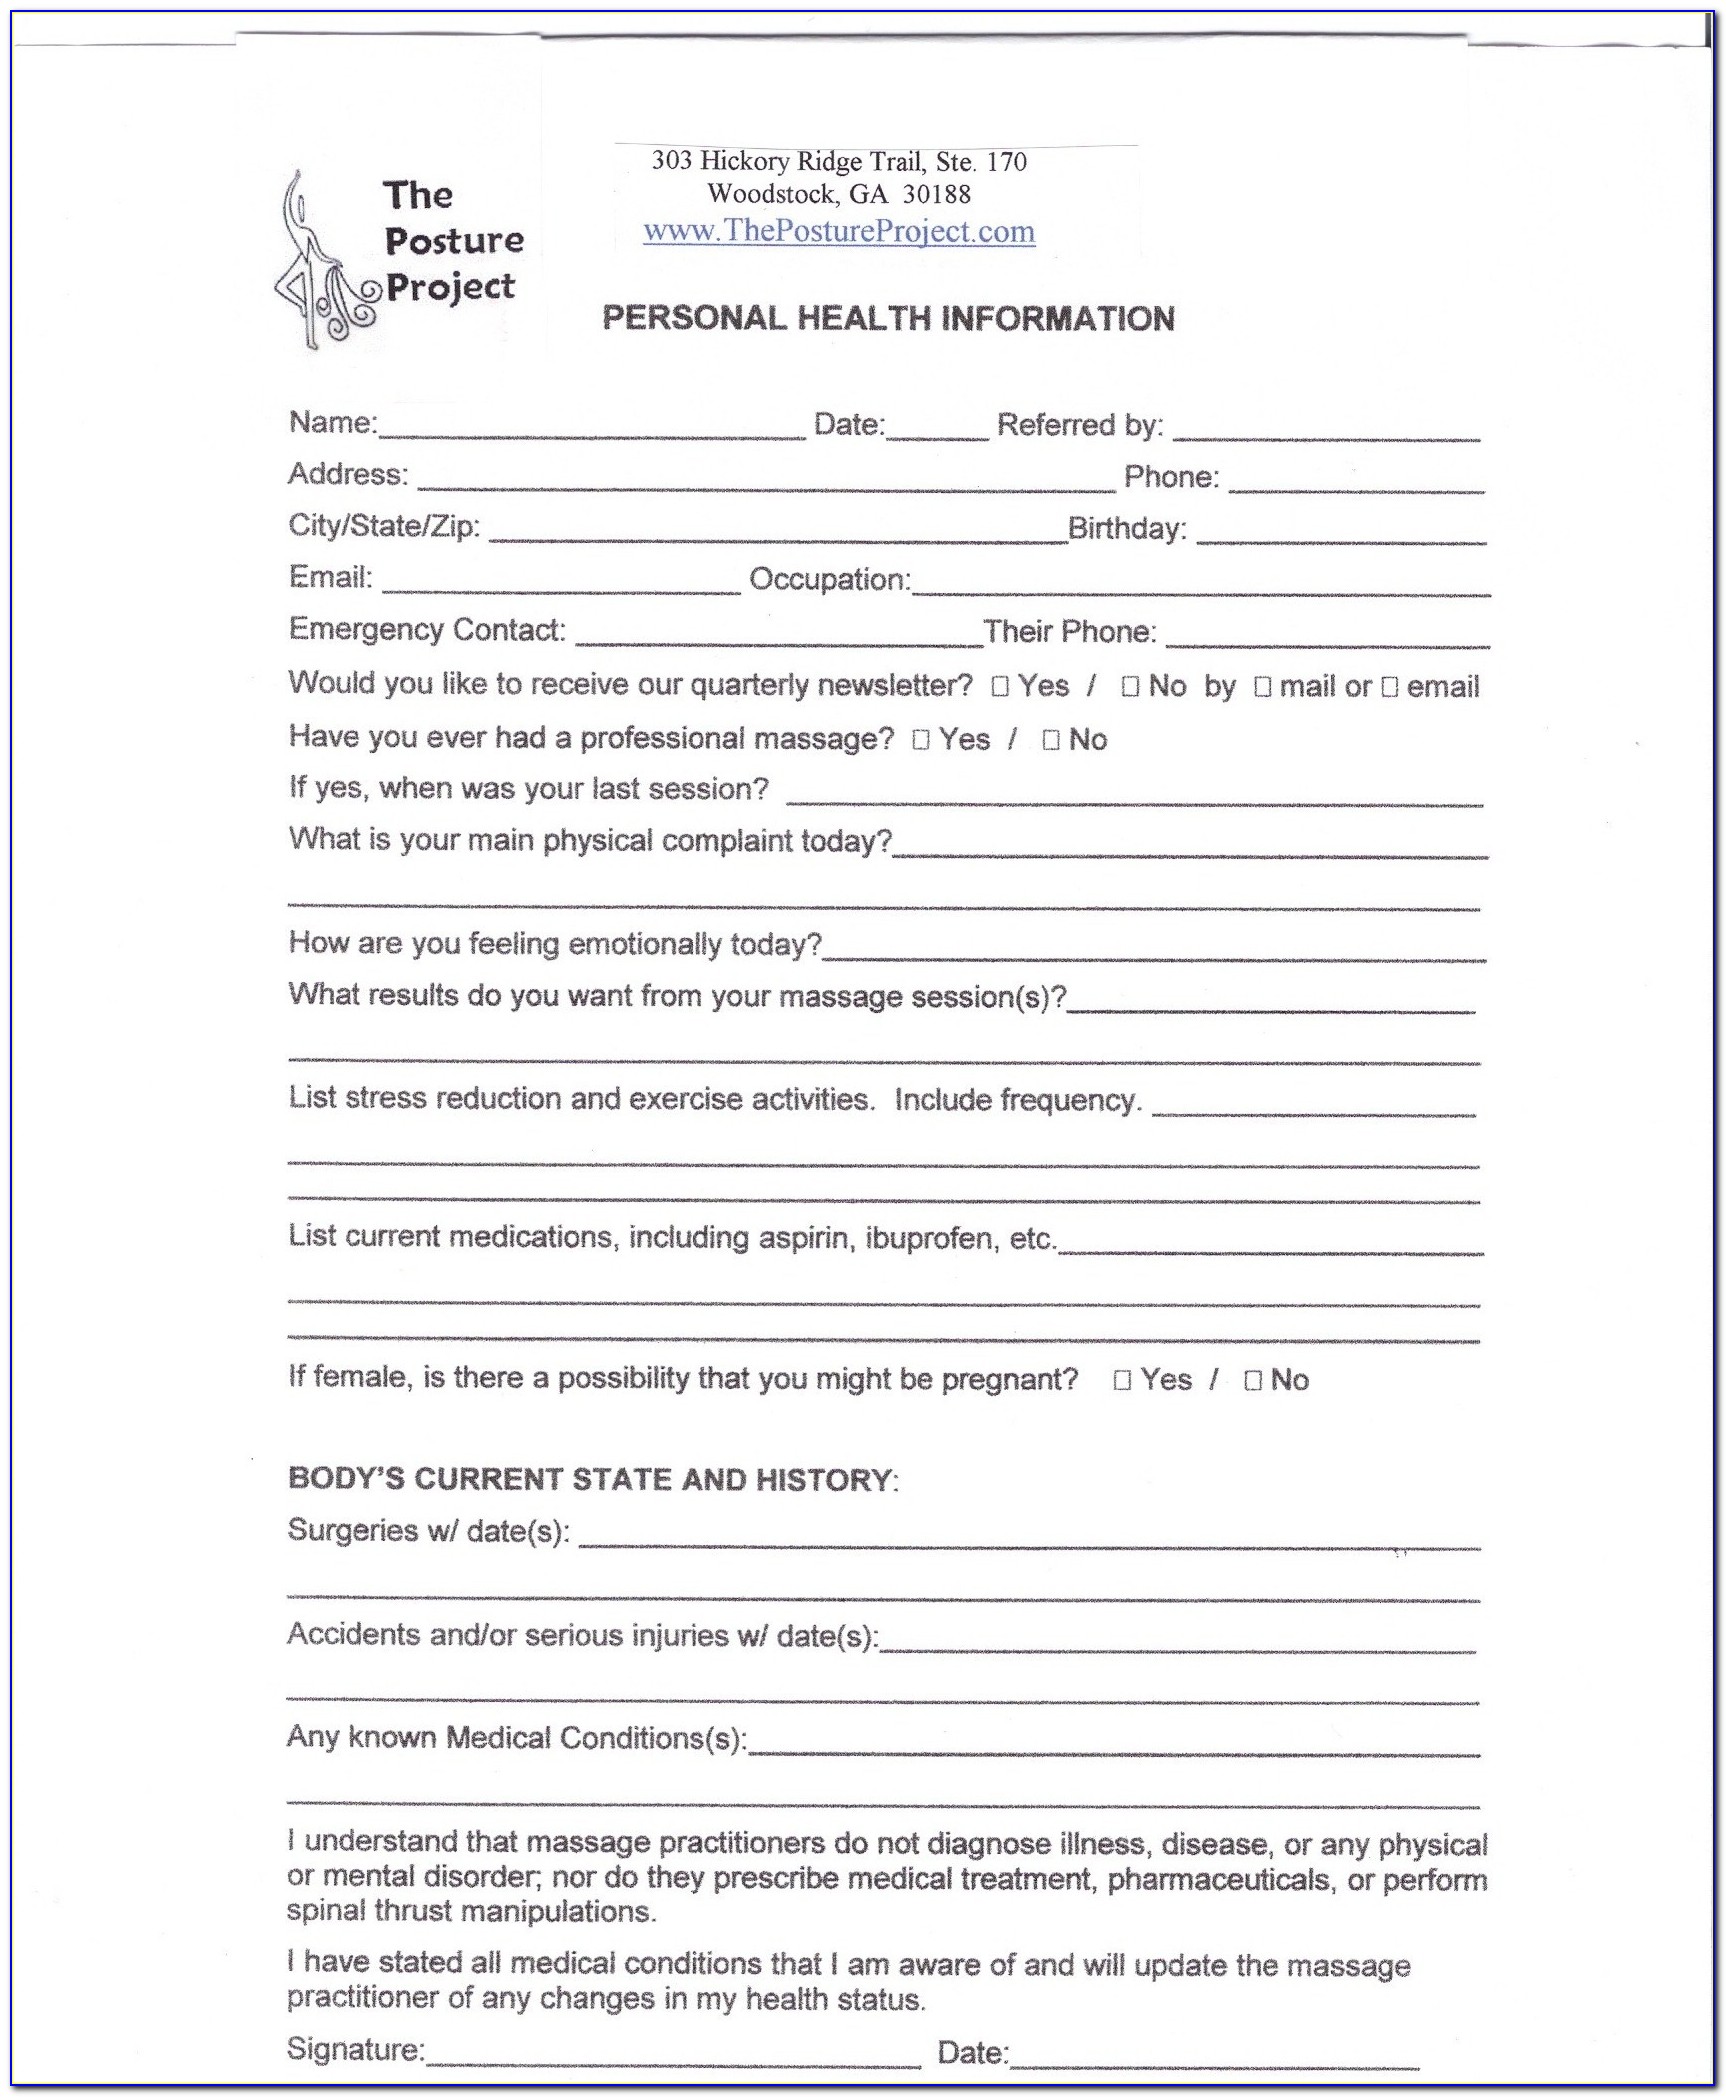 Client Intake Form Template Unique Massage Facial Loolhaspa Dayspa Intake Form And Faqs Therapy